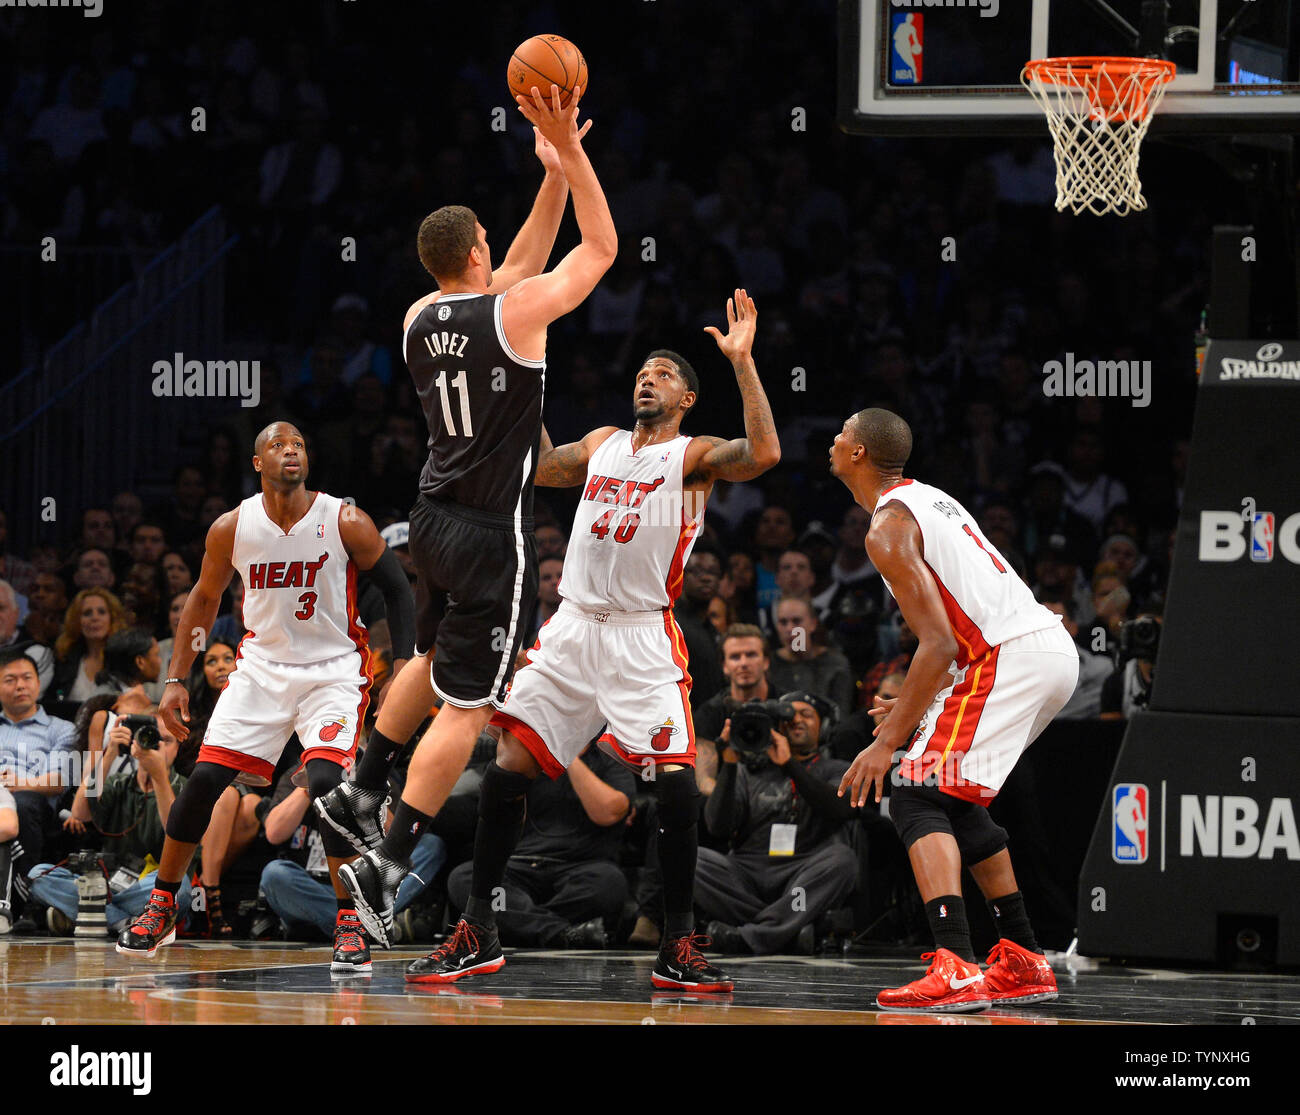 Brooklyn Nets center Brook Lopez (11) shoots over Miami Heat power forward Udonis Haslem (40), Heat shooting guard Dwyane Wade (3) and Heat center Chris Bosh (1) in the first quarter at Barclays Center in New York City on November 1, 2013.   UPI/Rich Kane Stock Photo